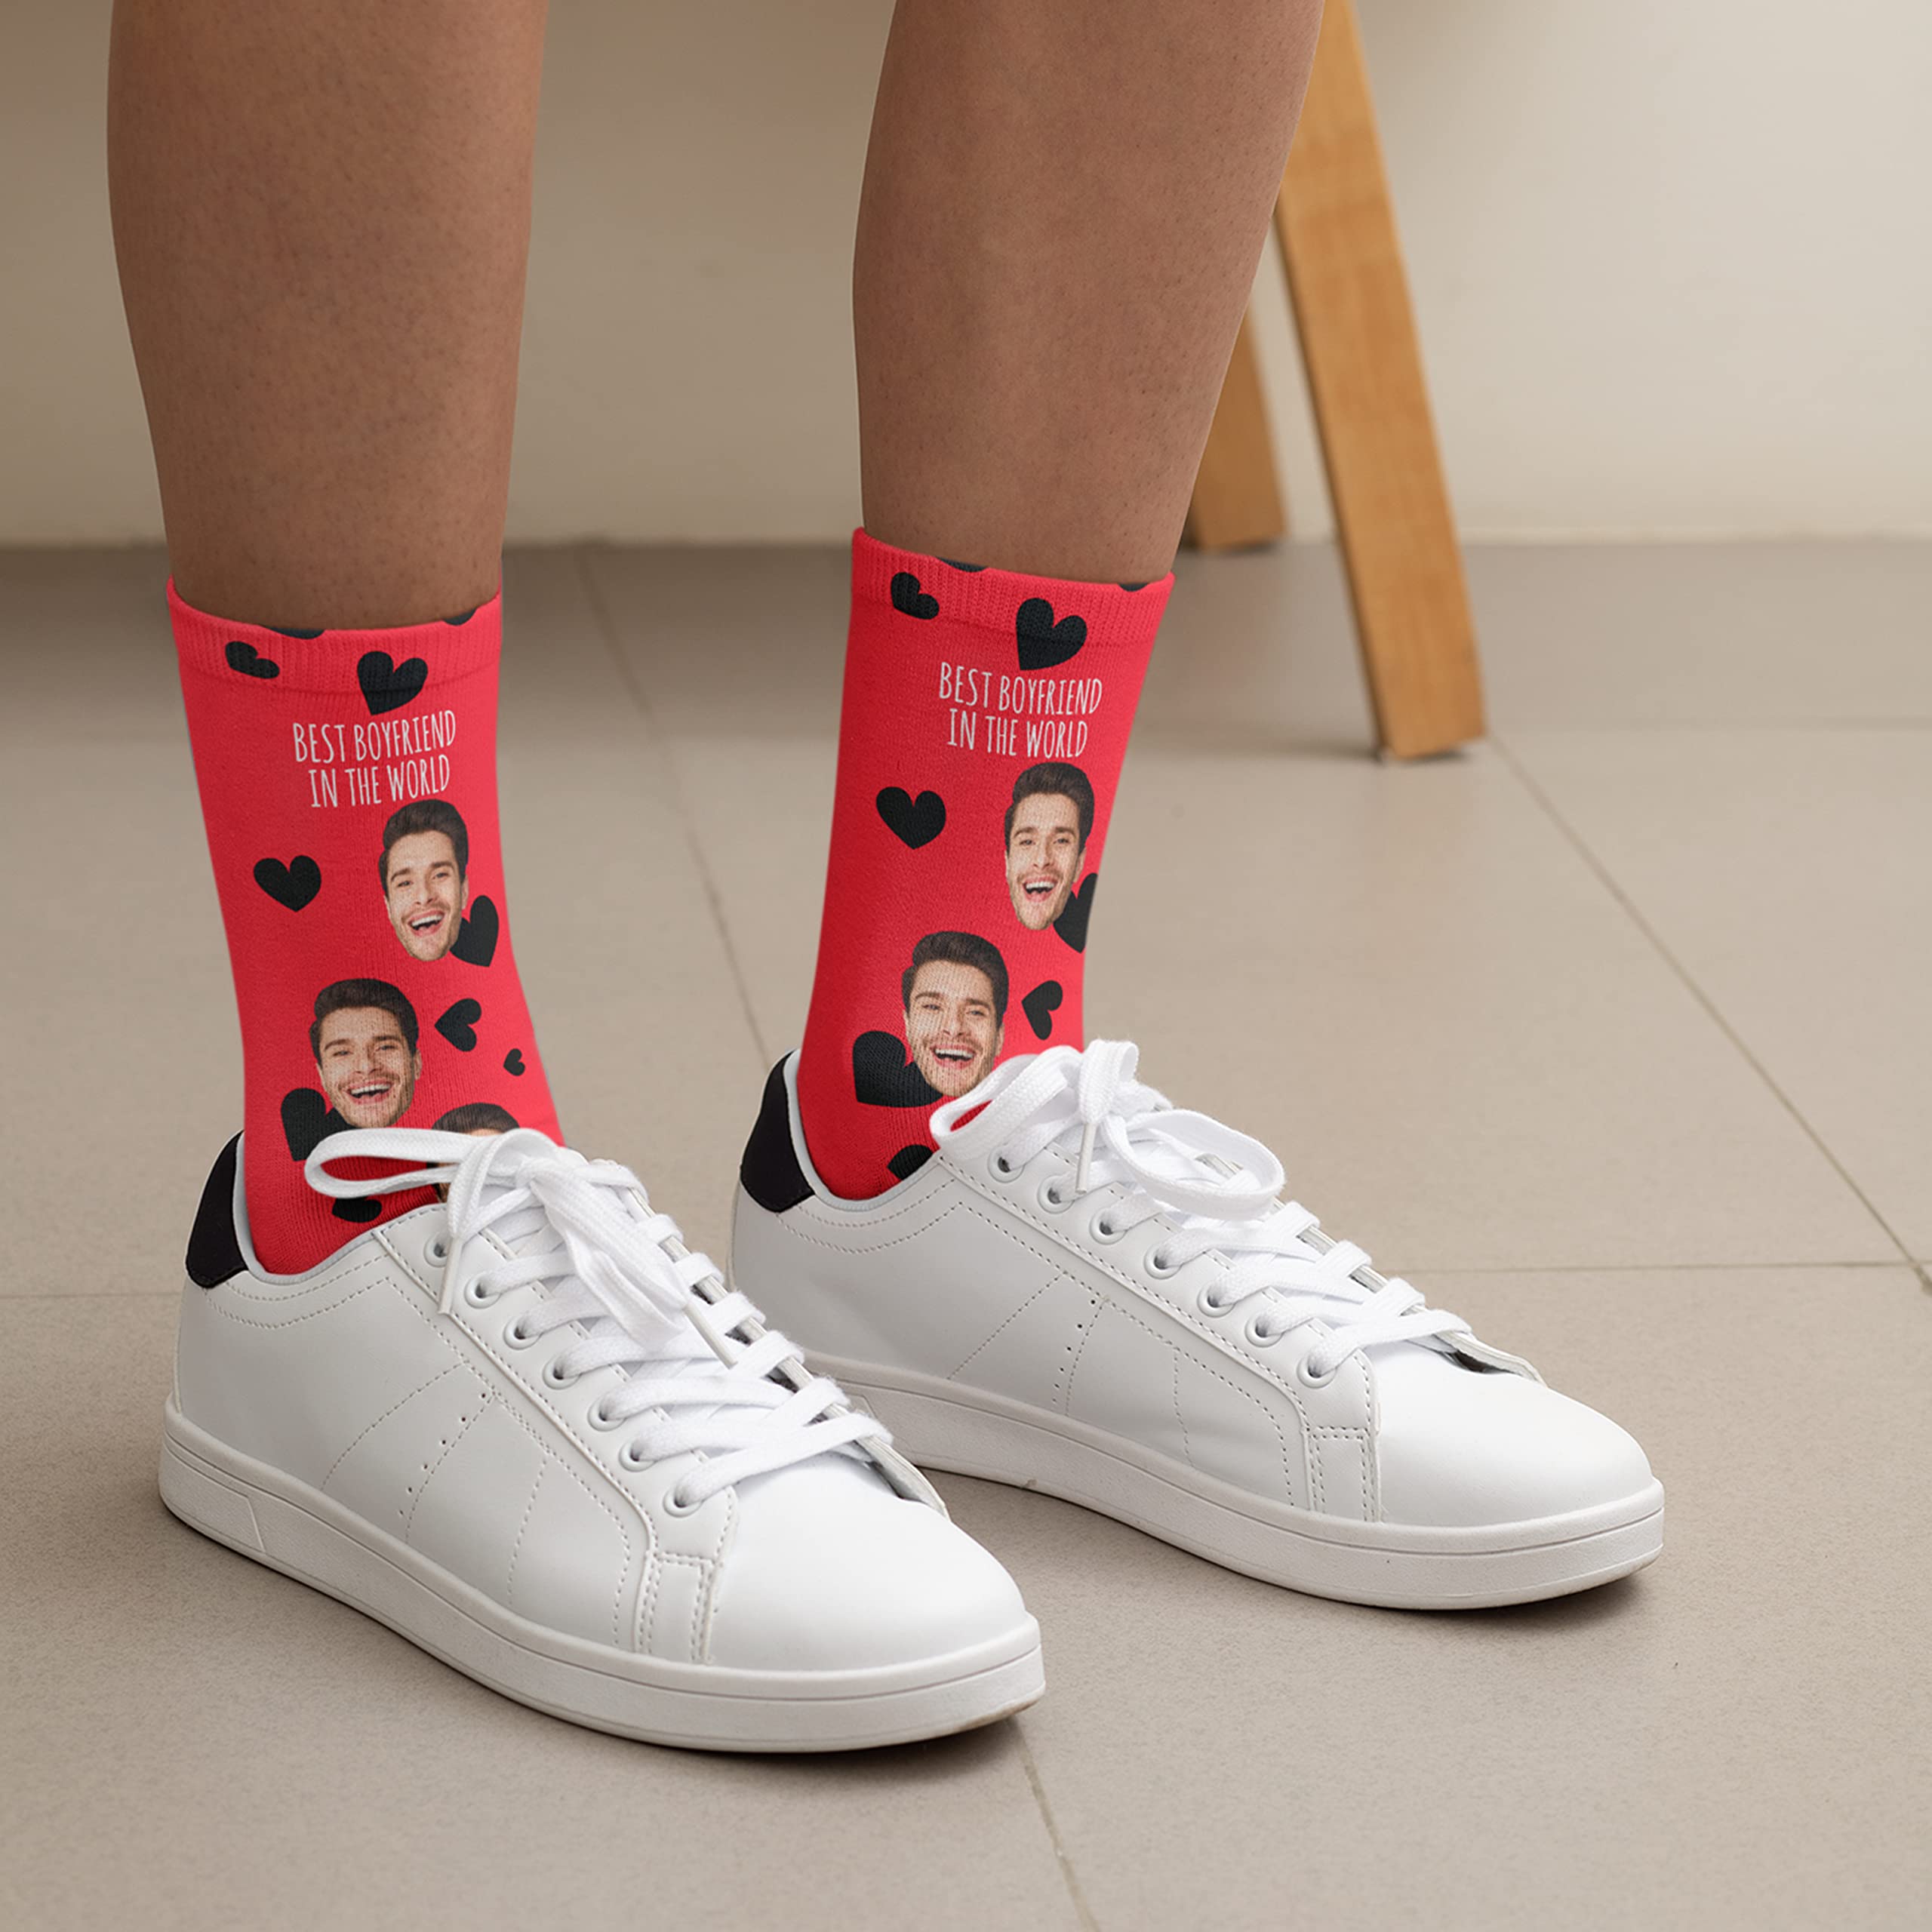 UPDATED Custom Photo Socks with Faces - Print Your Picture, Photo - Personalized Funny Crew Sock Gifts for Men Women